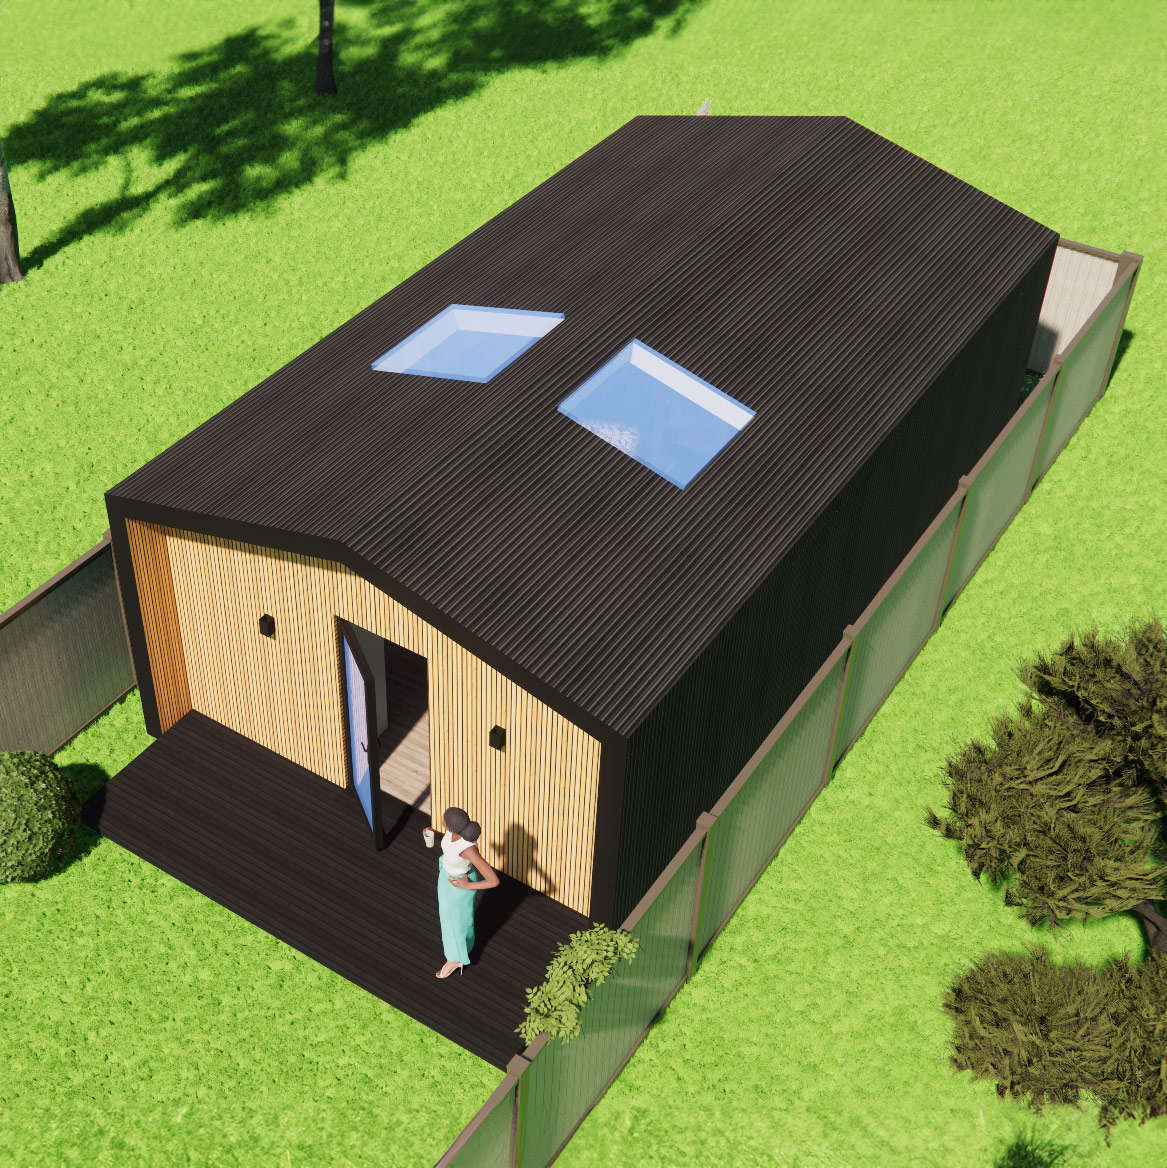 Visualisation of mobile home 4.8m by 8.4m